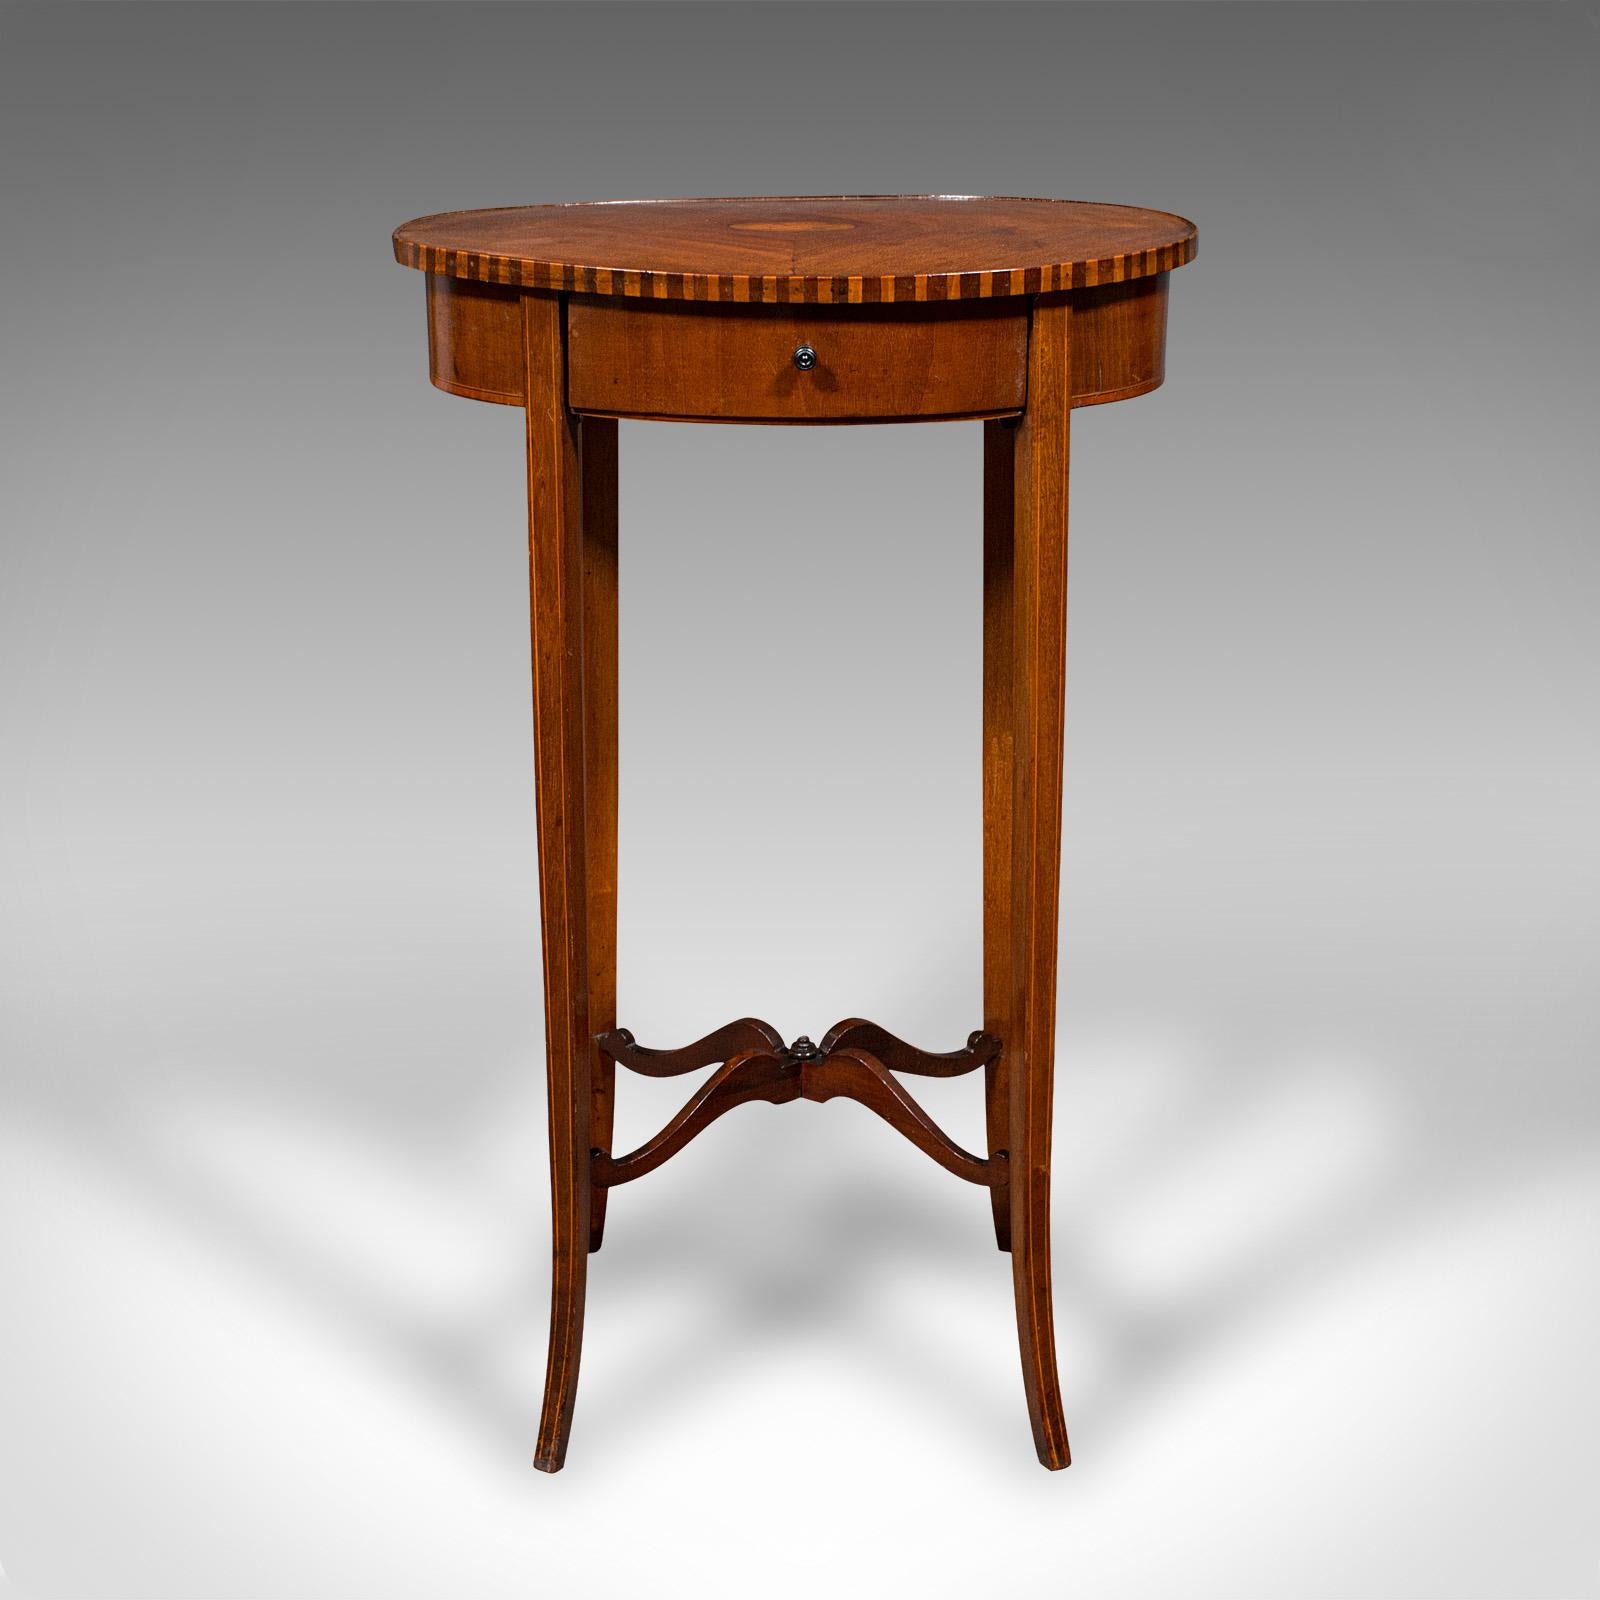 This is a small antique lamp table. An English, mahogany oval side table in Regency Revival taste, dating to the Edwardian period, circa 1910.
 
Presenting Regency overtones in a delightfully petite oval form
Displays a desirable aged patina and